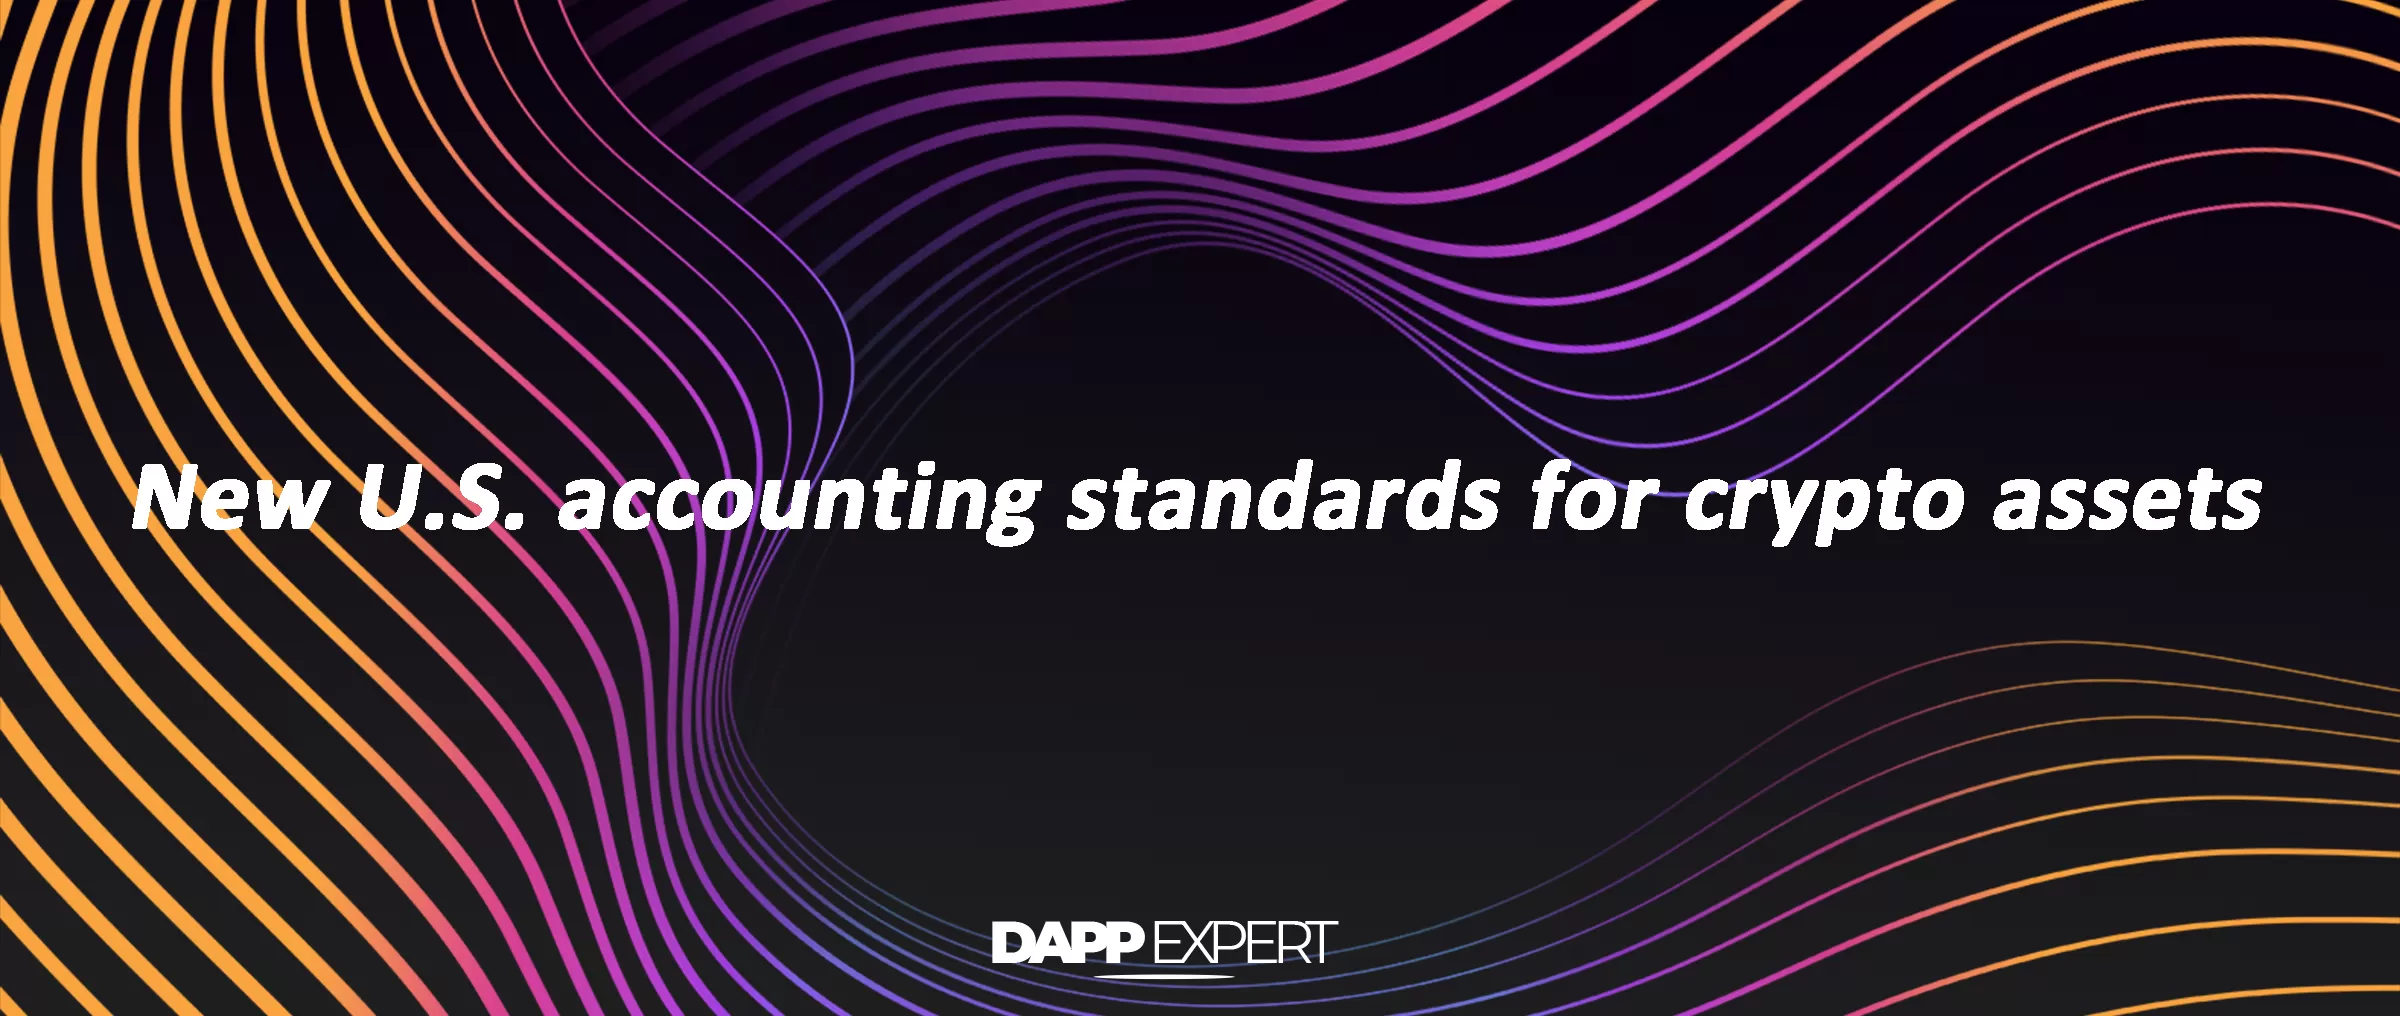 New U.S. accounting standards for crypto assets